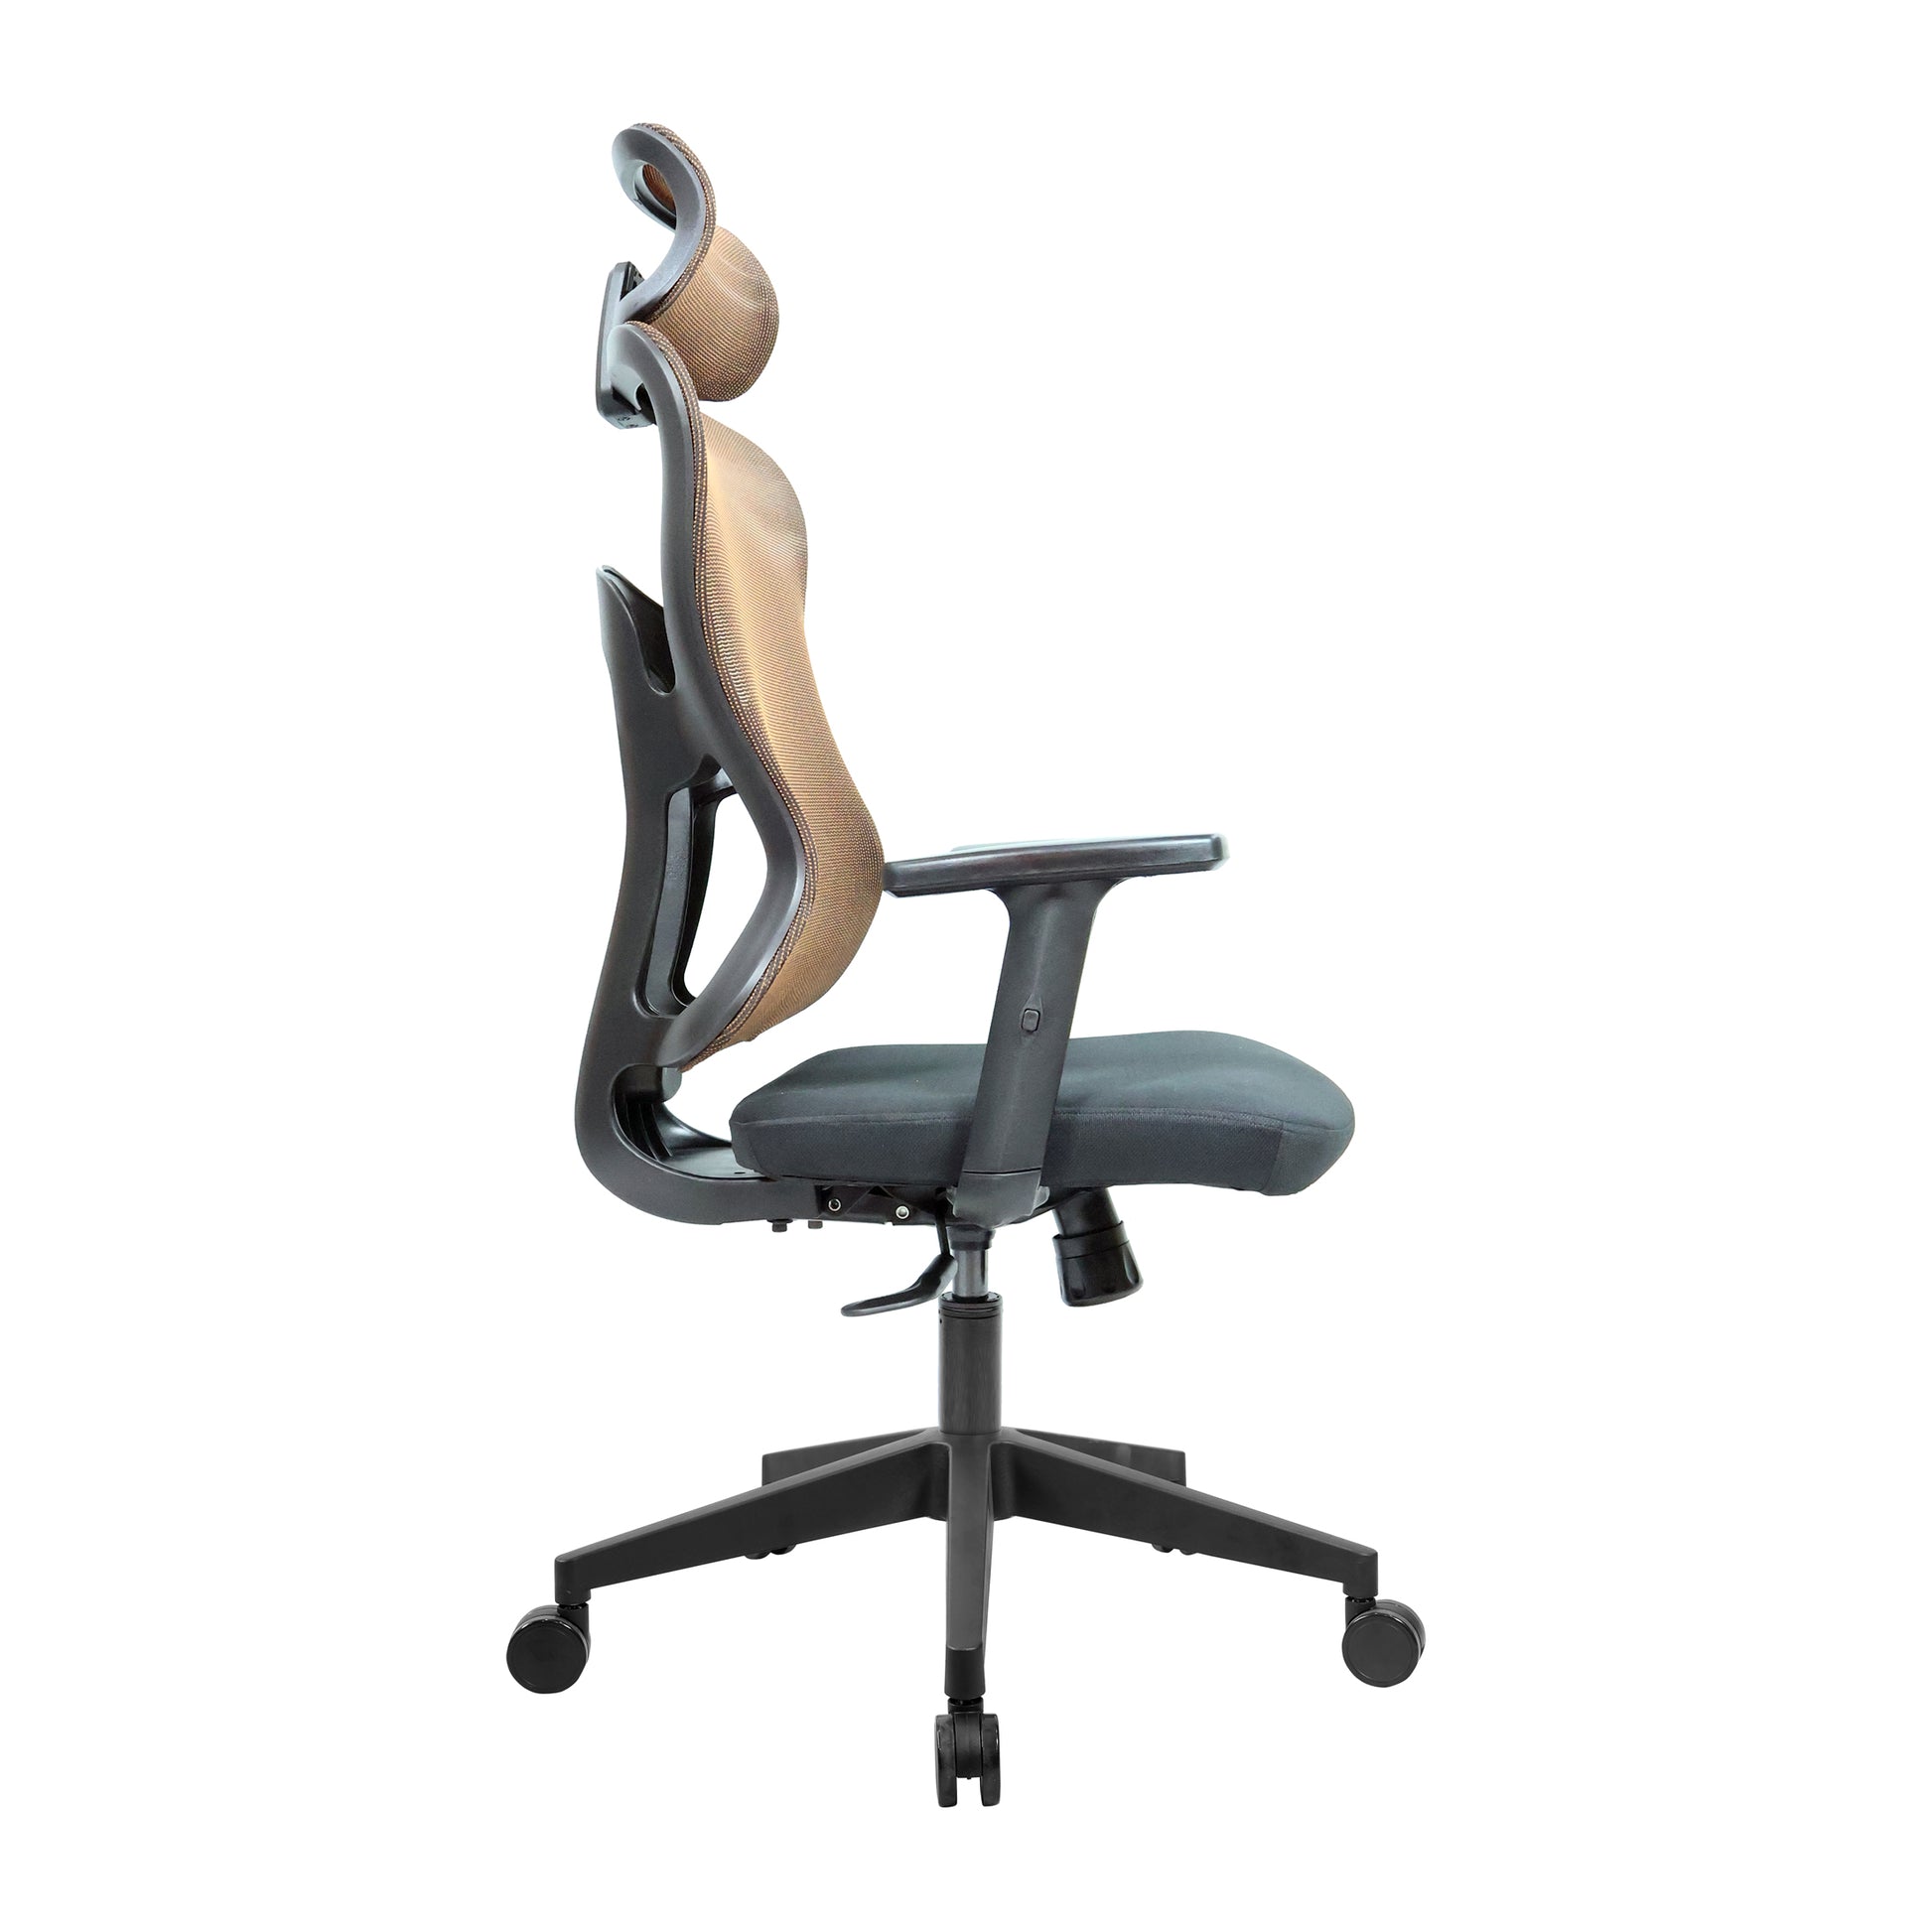 Lumbarc High Back Chair Executive Chairs - makemychairs